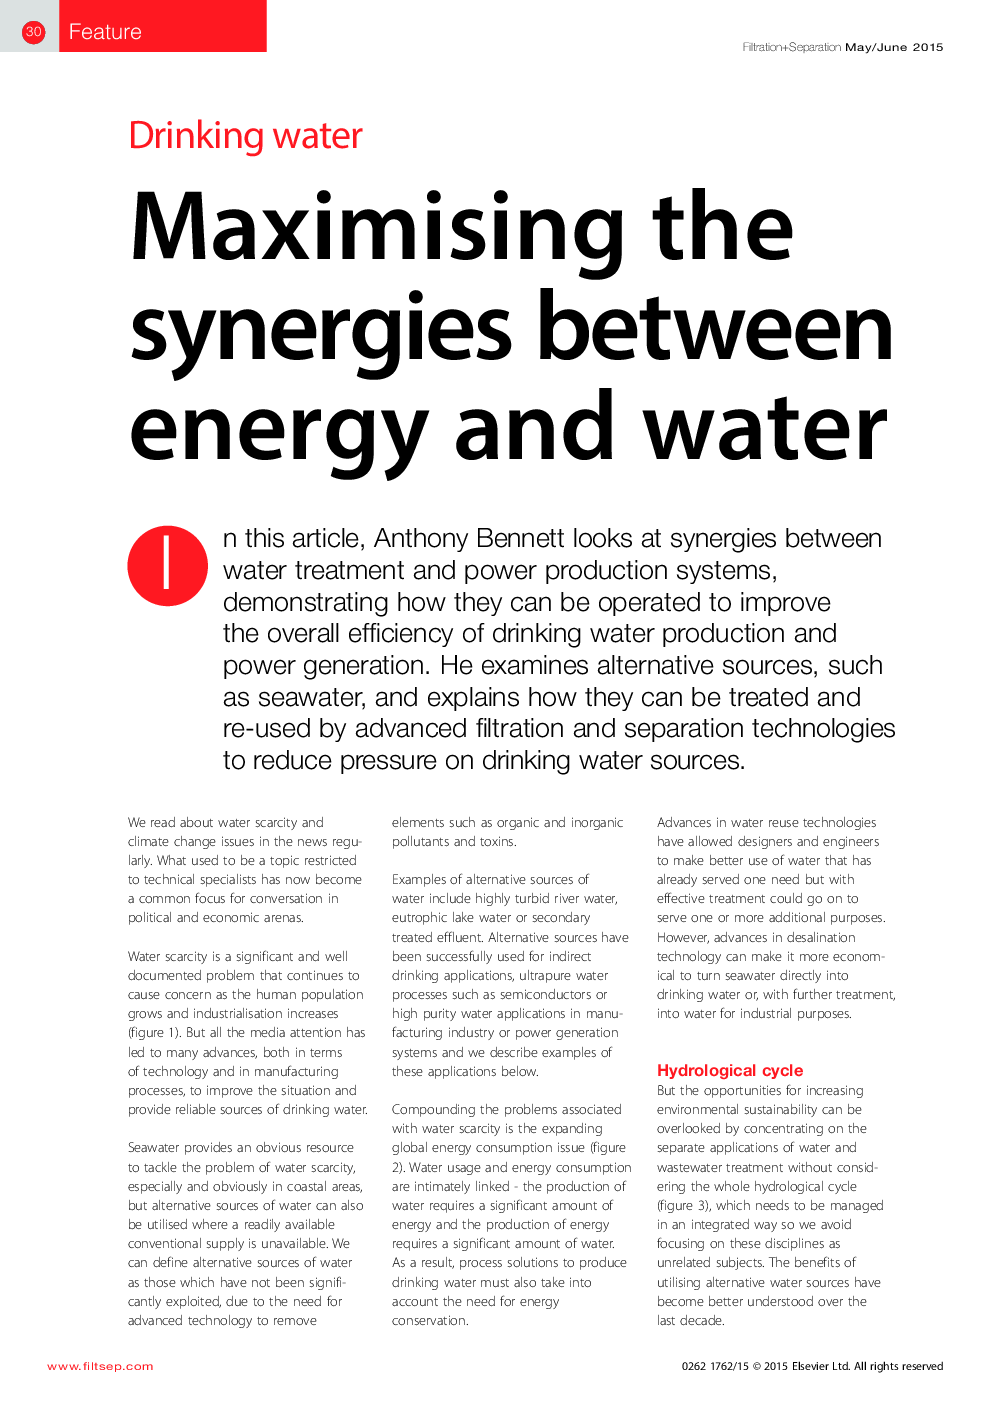 Maximising the synergies between energy and water